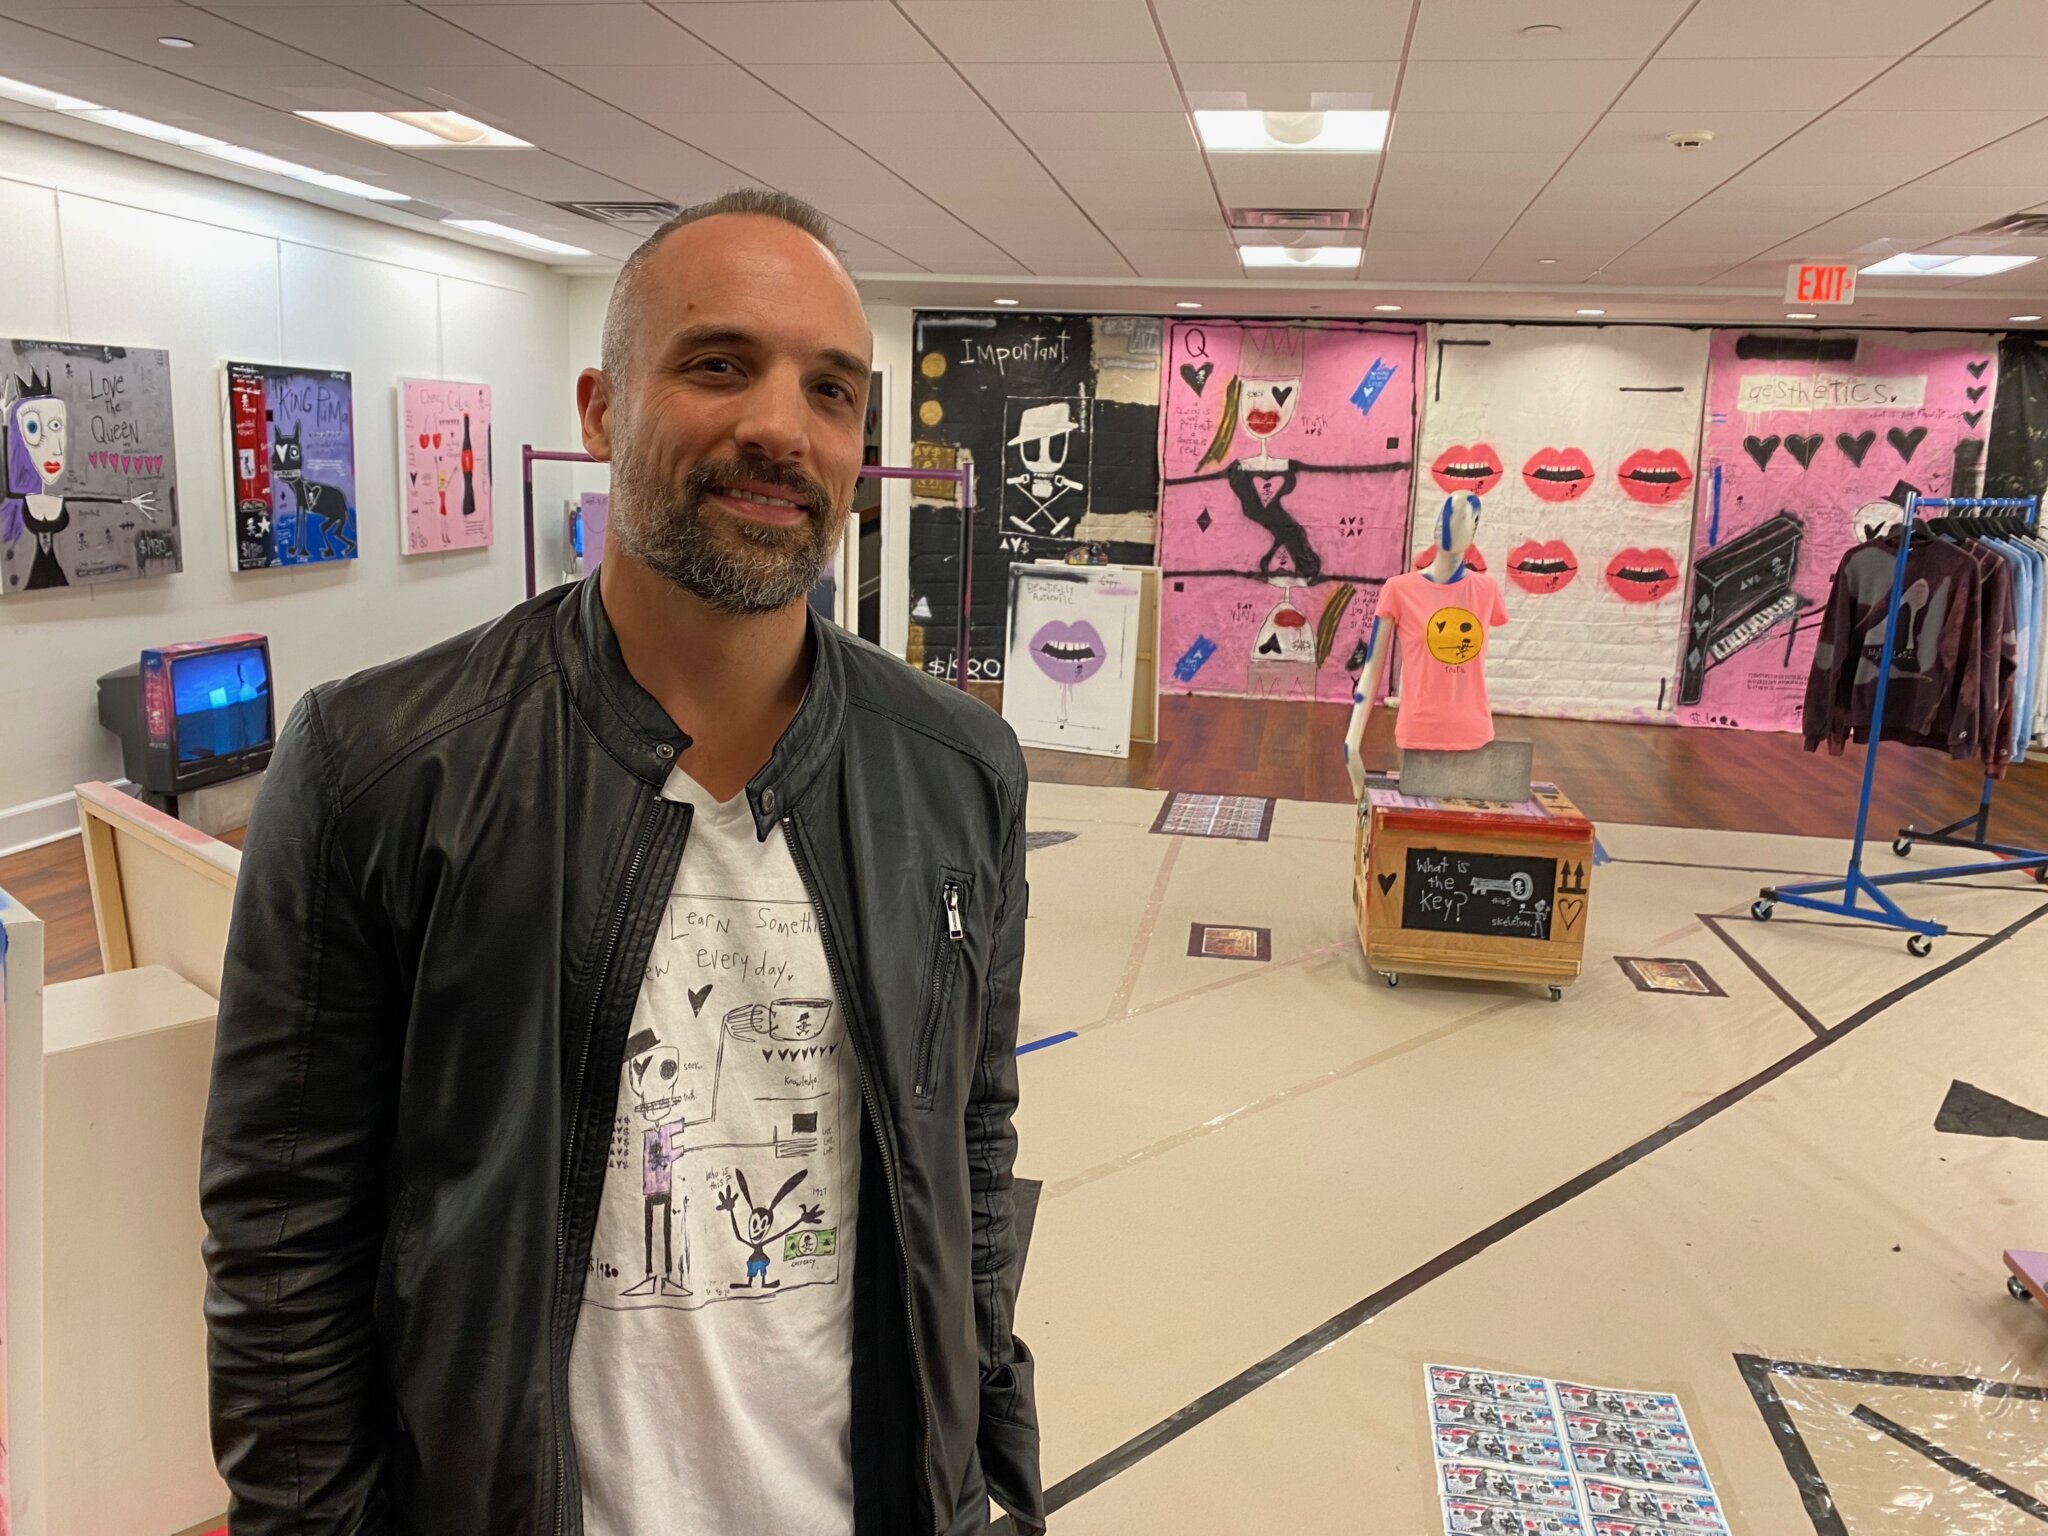 Adam Baranello shows off his "This Is My Art" exhibition at Southampton Cultural Center